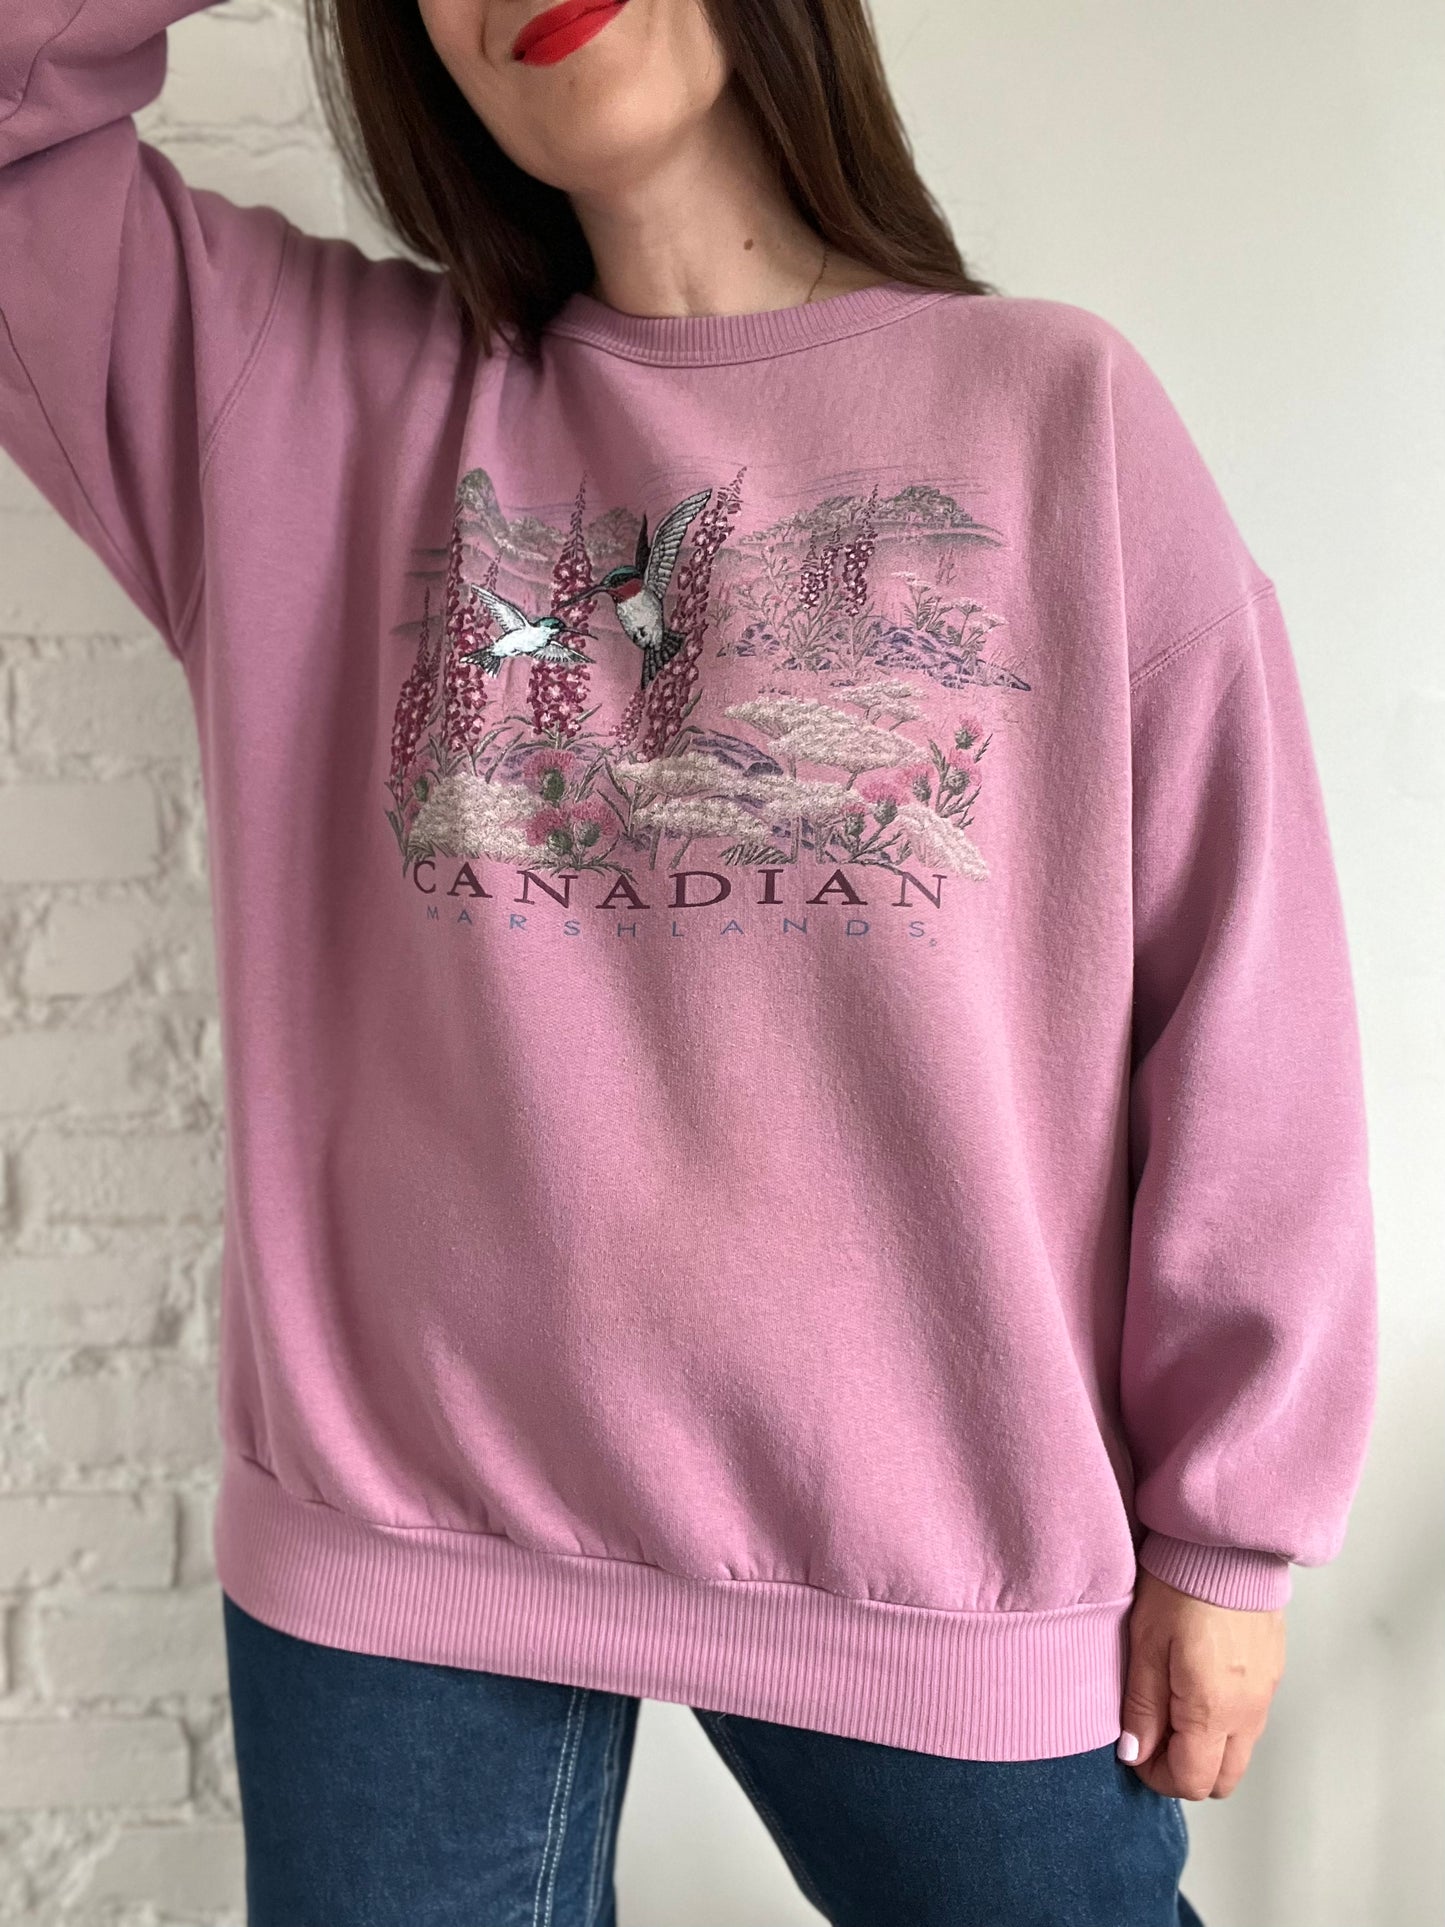 Canadian Marshlands Embroidery Sweater - XL/XXL